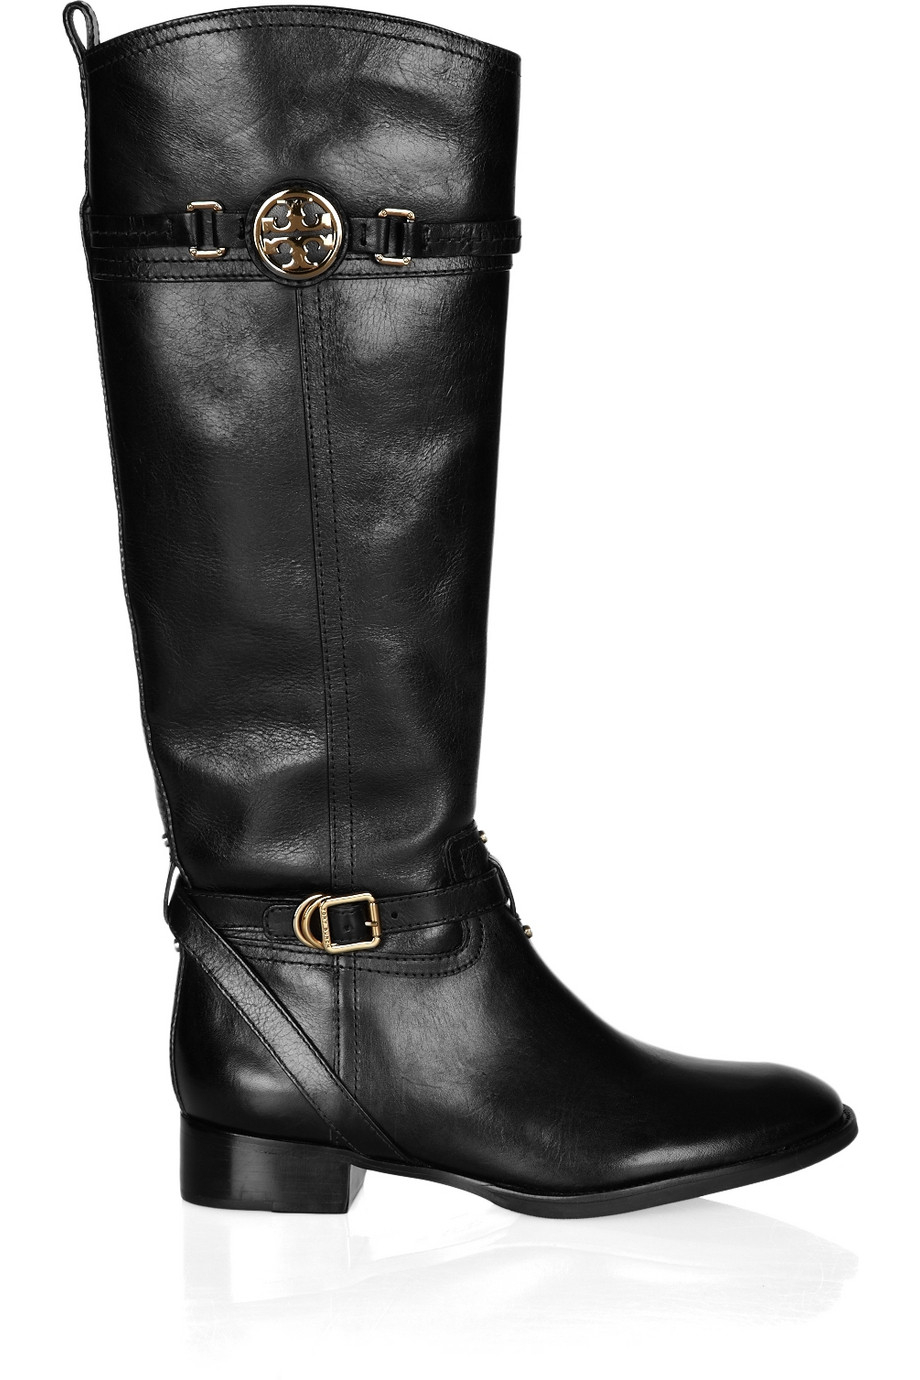 Lyst - Tory Burch Calista Leather Riding Boots in Black